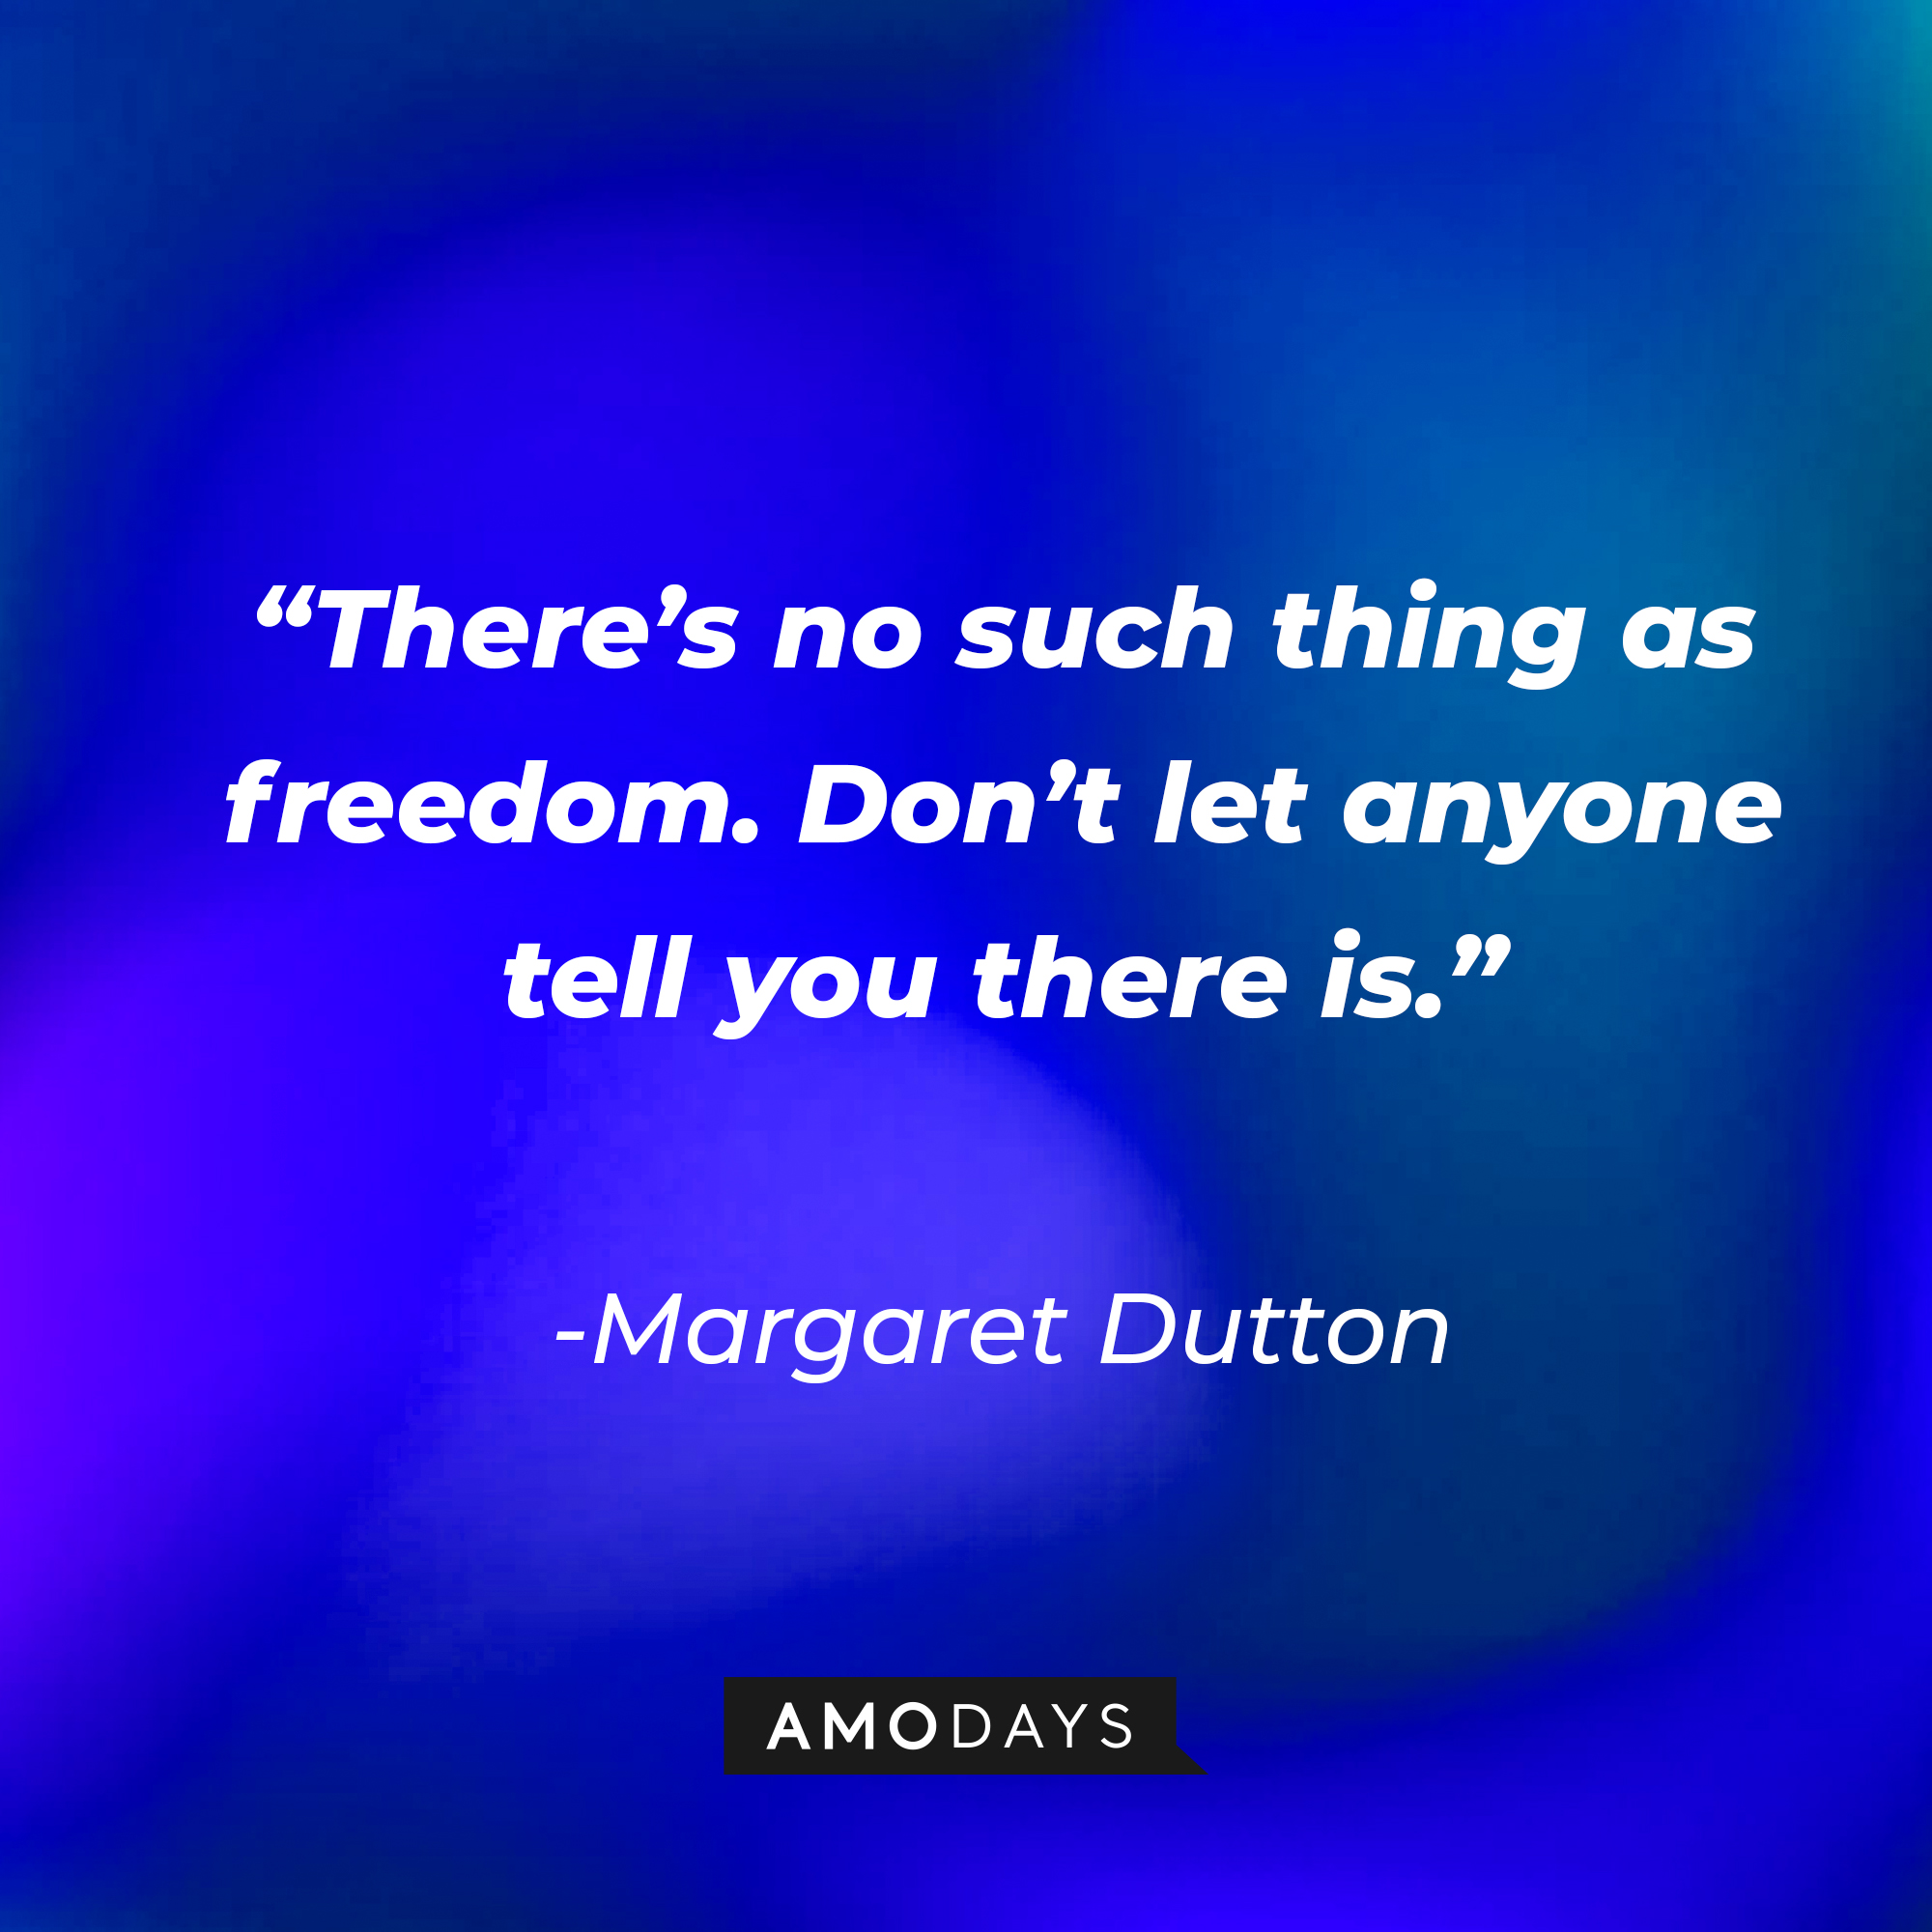 Margaret Dutton’s quote: There’s no such thing as freedom, Elsa. Don’t let anyone tell you there is.” | Source: AmoDays